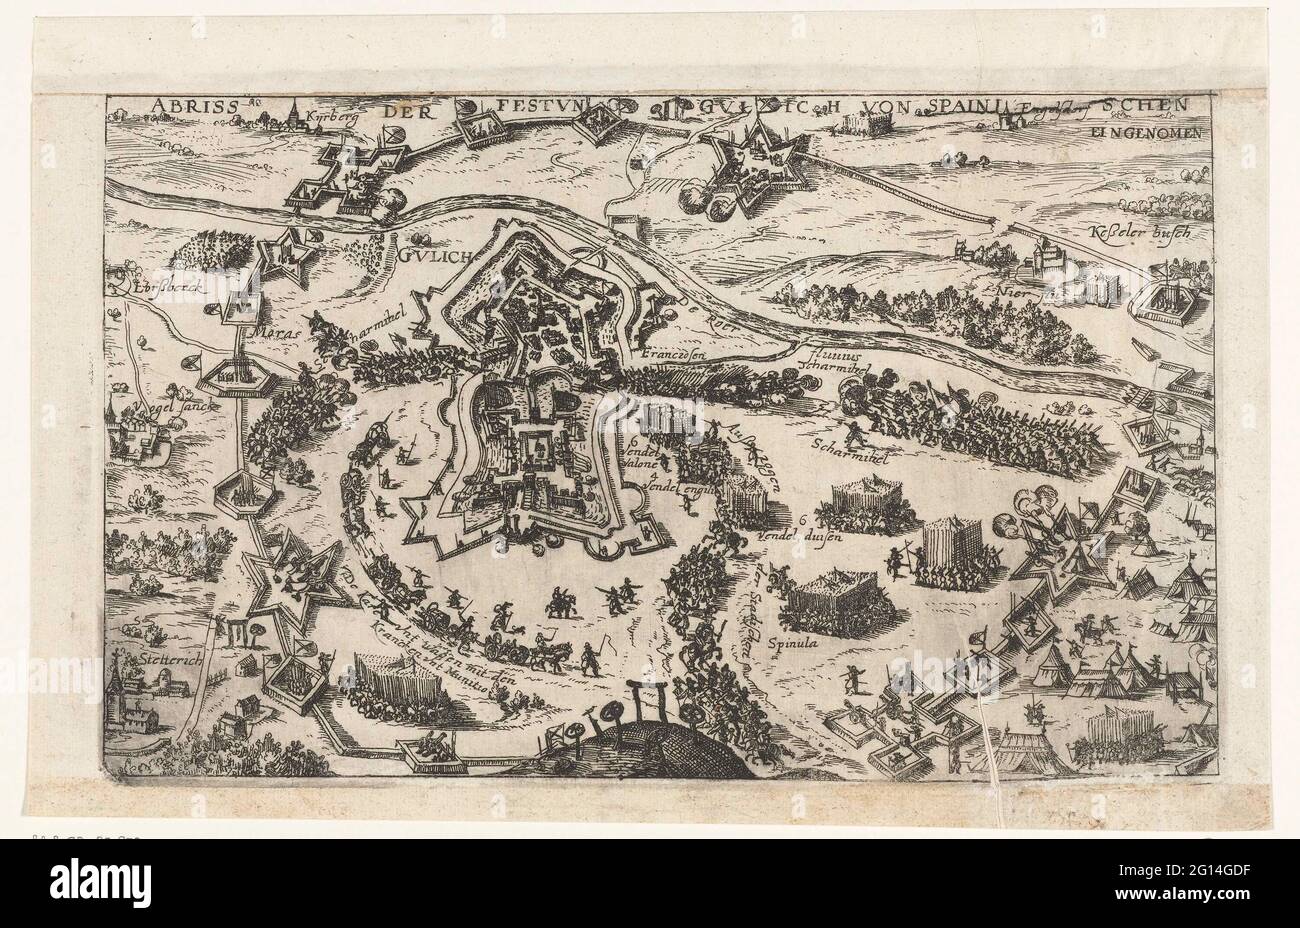 Conquest of Gulik, 1621; Abriss der Festung Gulich von Spainischen Eingenomen. Siege and conquest of Gulik by the Spanish army under Count Hendrik van den Bergh, 1621-1622. Plan of the city with the castle in the surrounding country. With advancing and retracting armies. Stock Photo